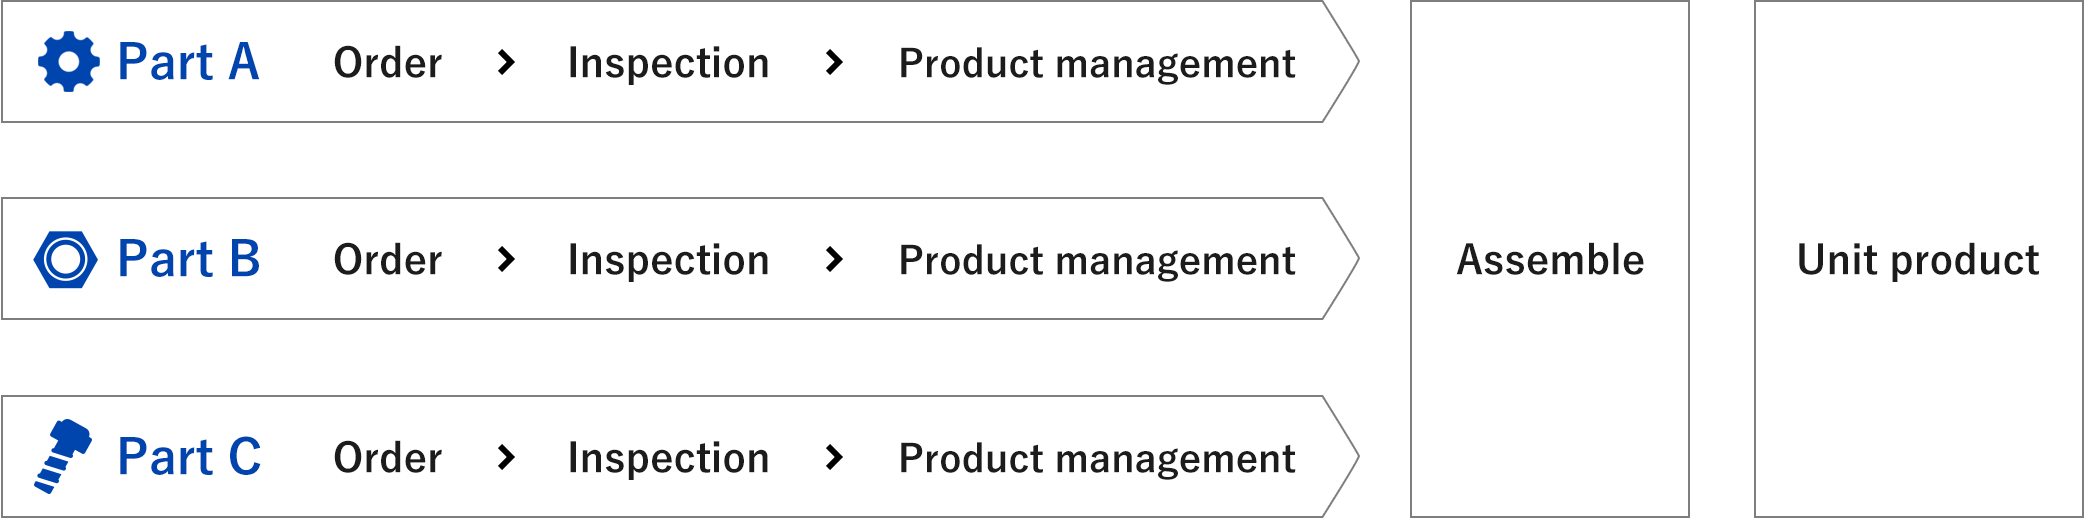 Flow of order placement and management work in the past